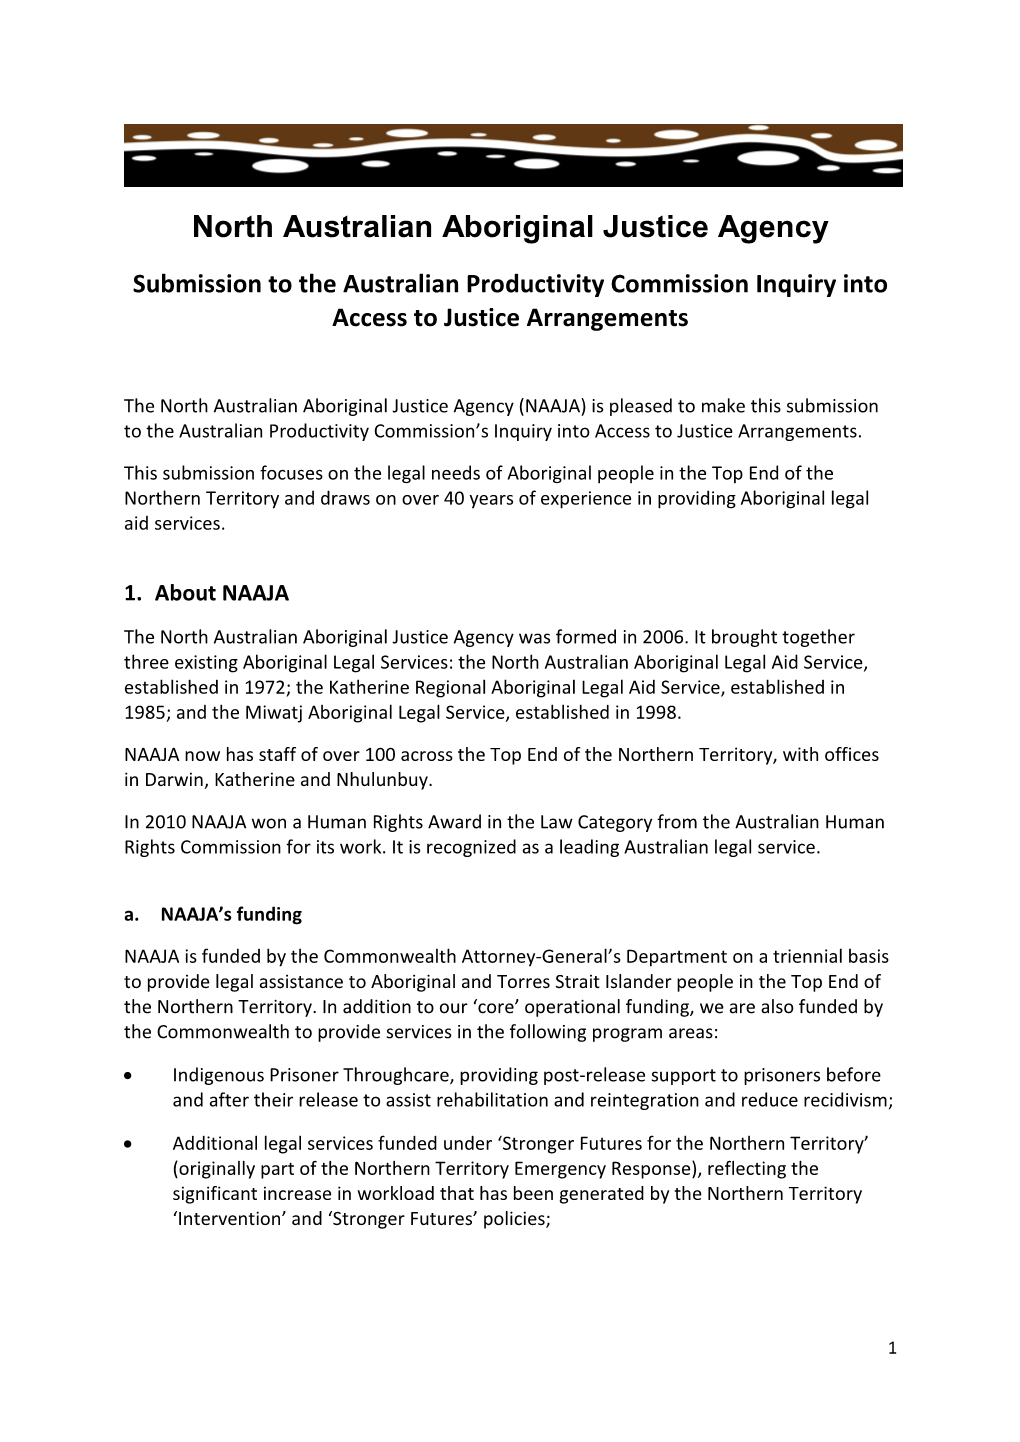 North Australian Aboriginal Justice Agency Submission to the Australian Productivity Commission Inquiry Into Access to Justice Arrangements